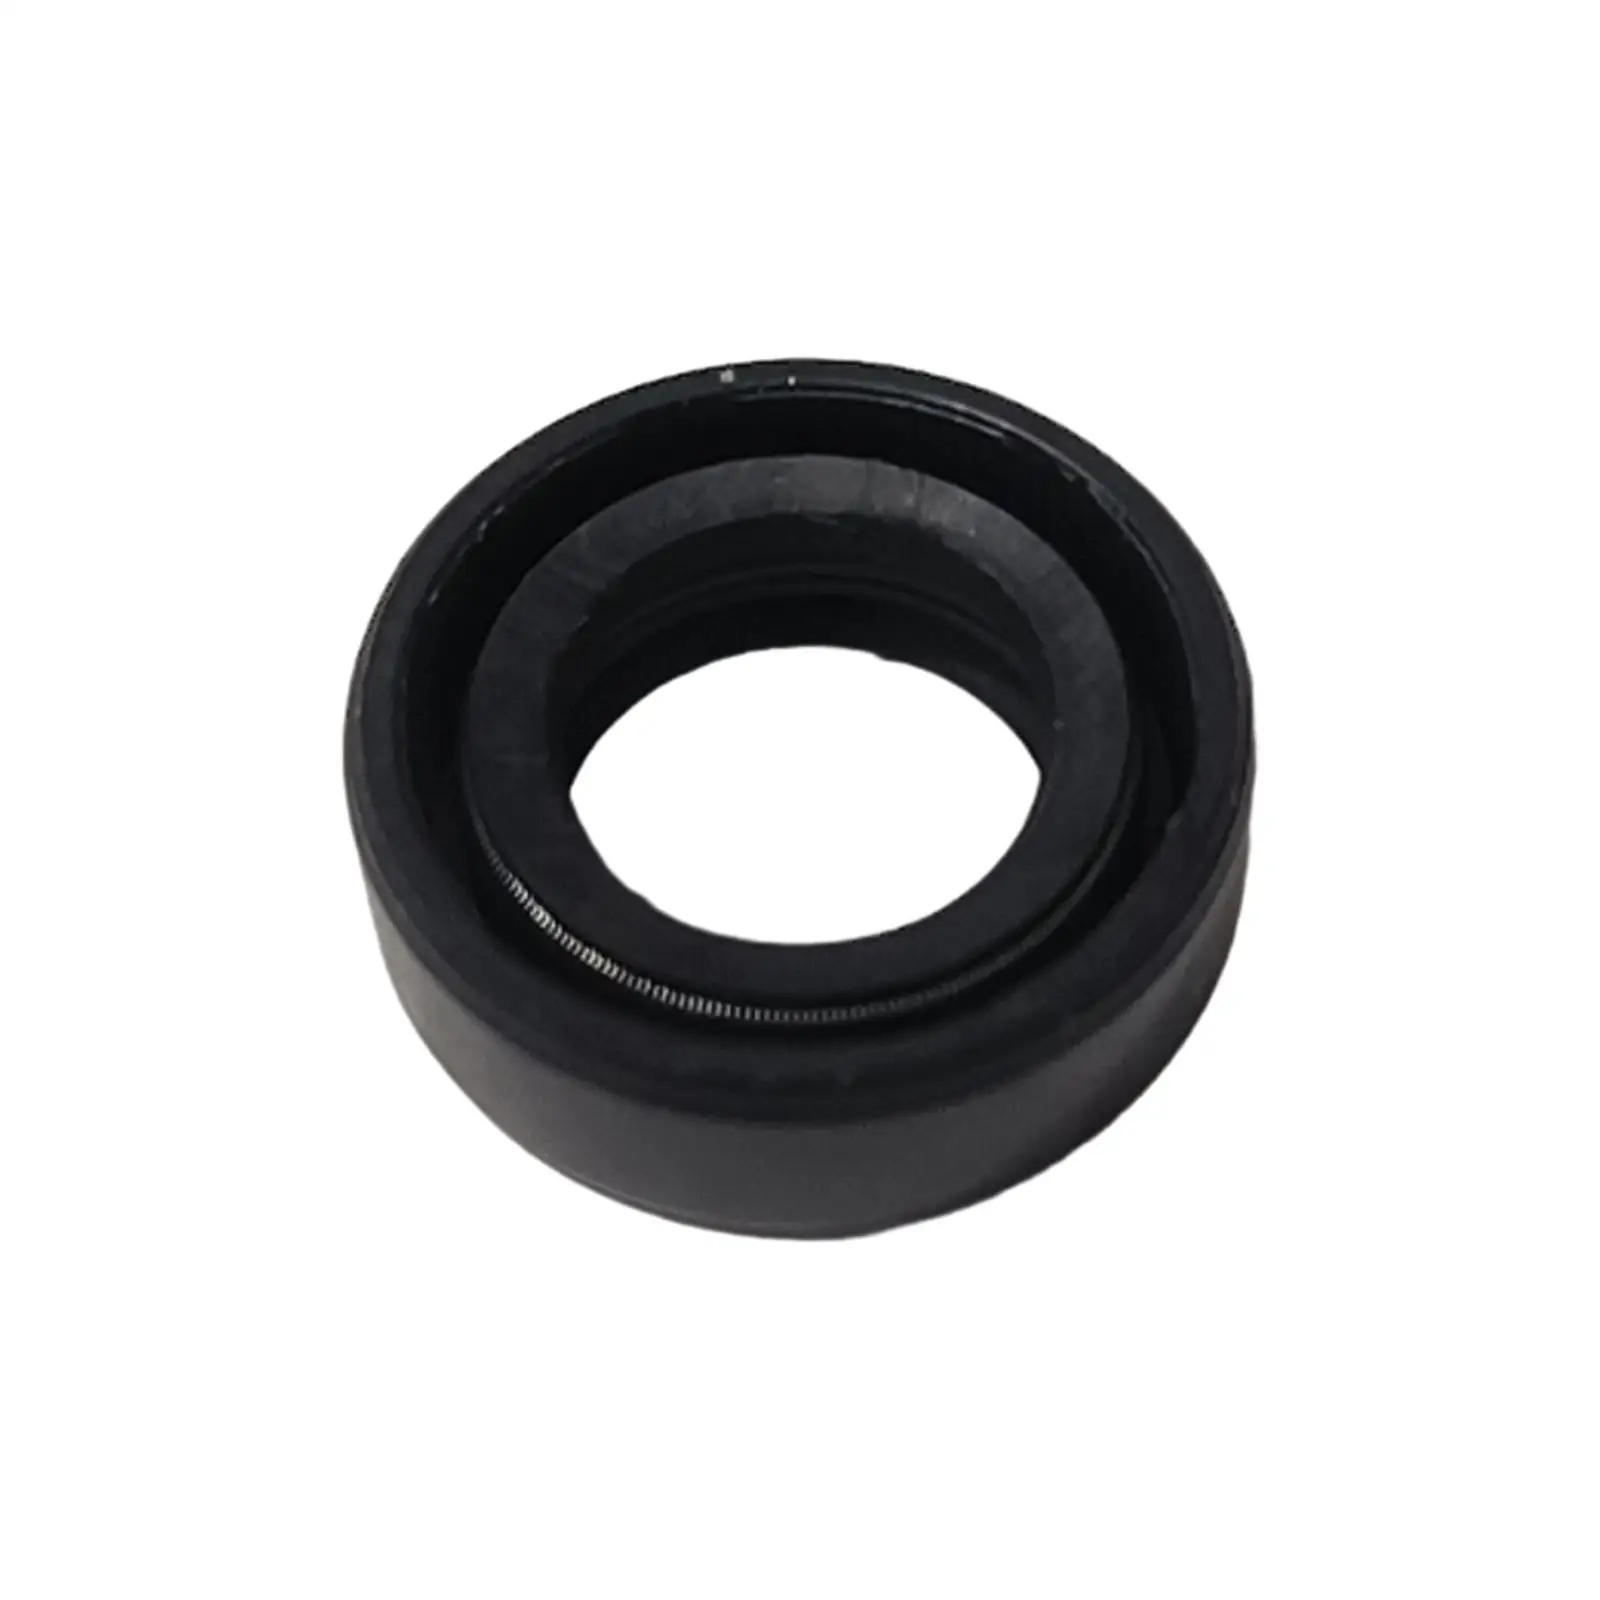 93101-13M12 931011380000 Shaft Oil Seals Fit for Yamaha 3HP 4HP 5HP Outboard Motor